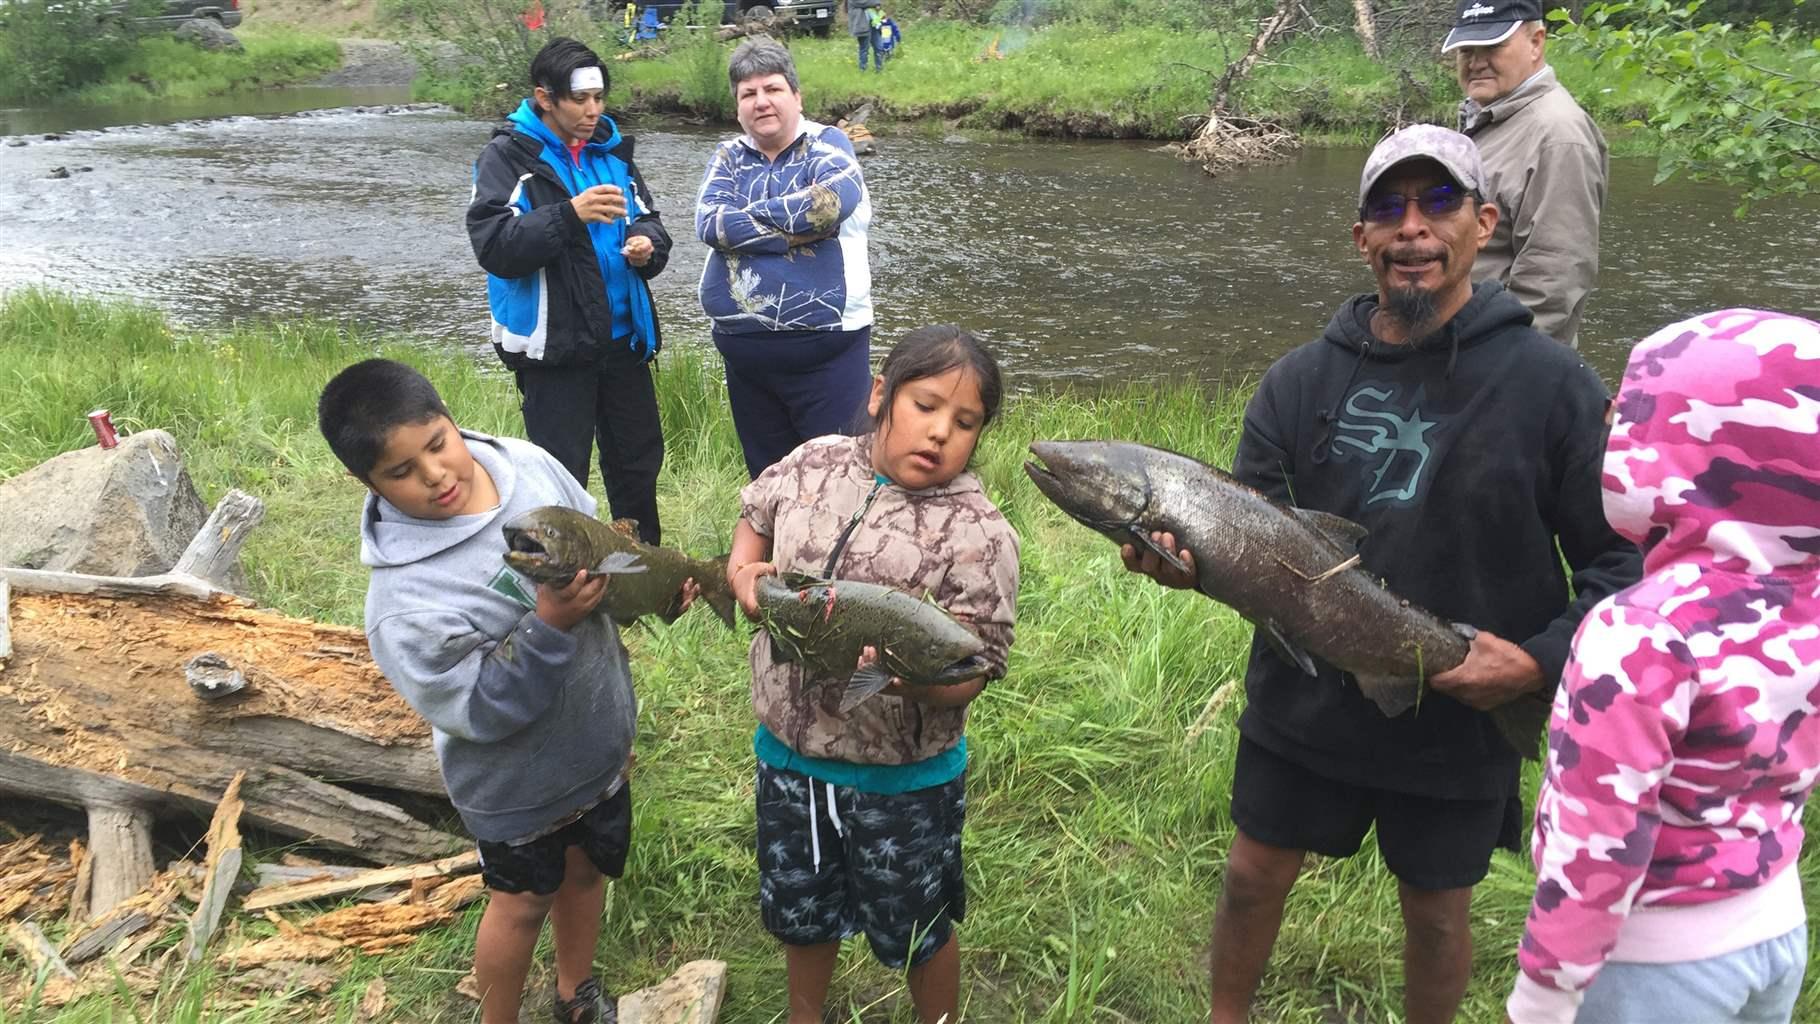 Burns Paiute Tribe holding salmon they are releasing back into the river